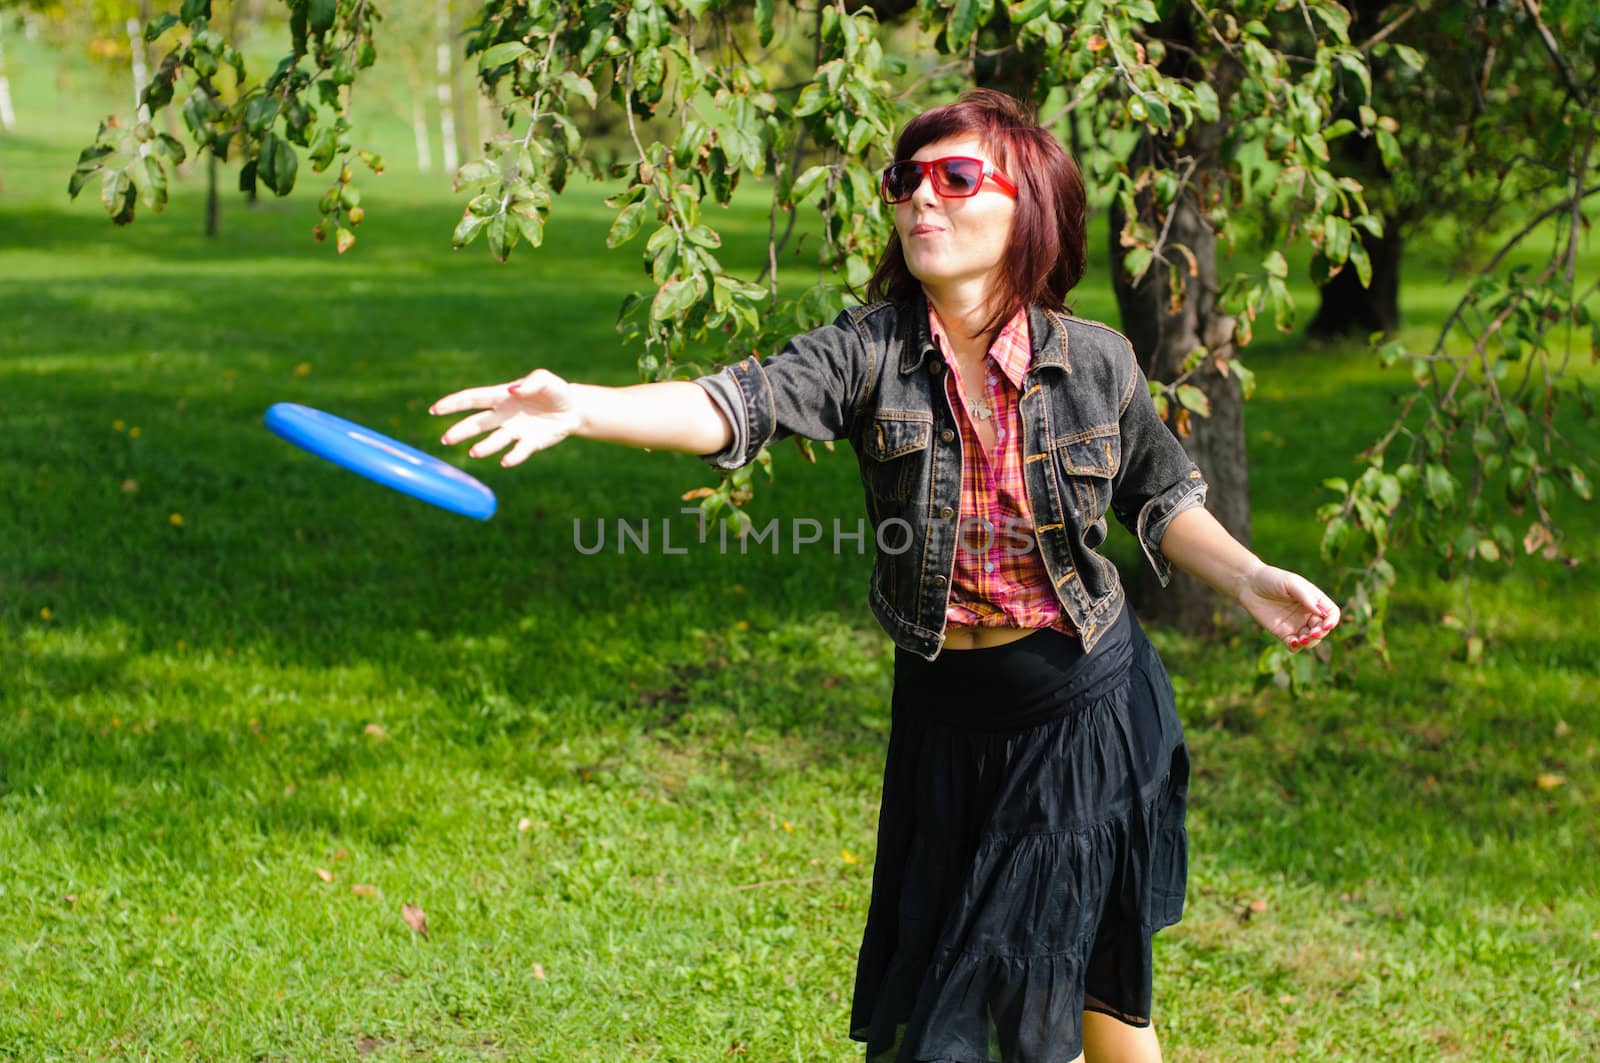 Young woman having fun with frisbee in the parkin sunny summer day.